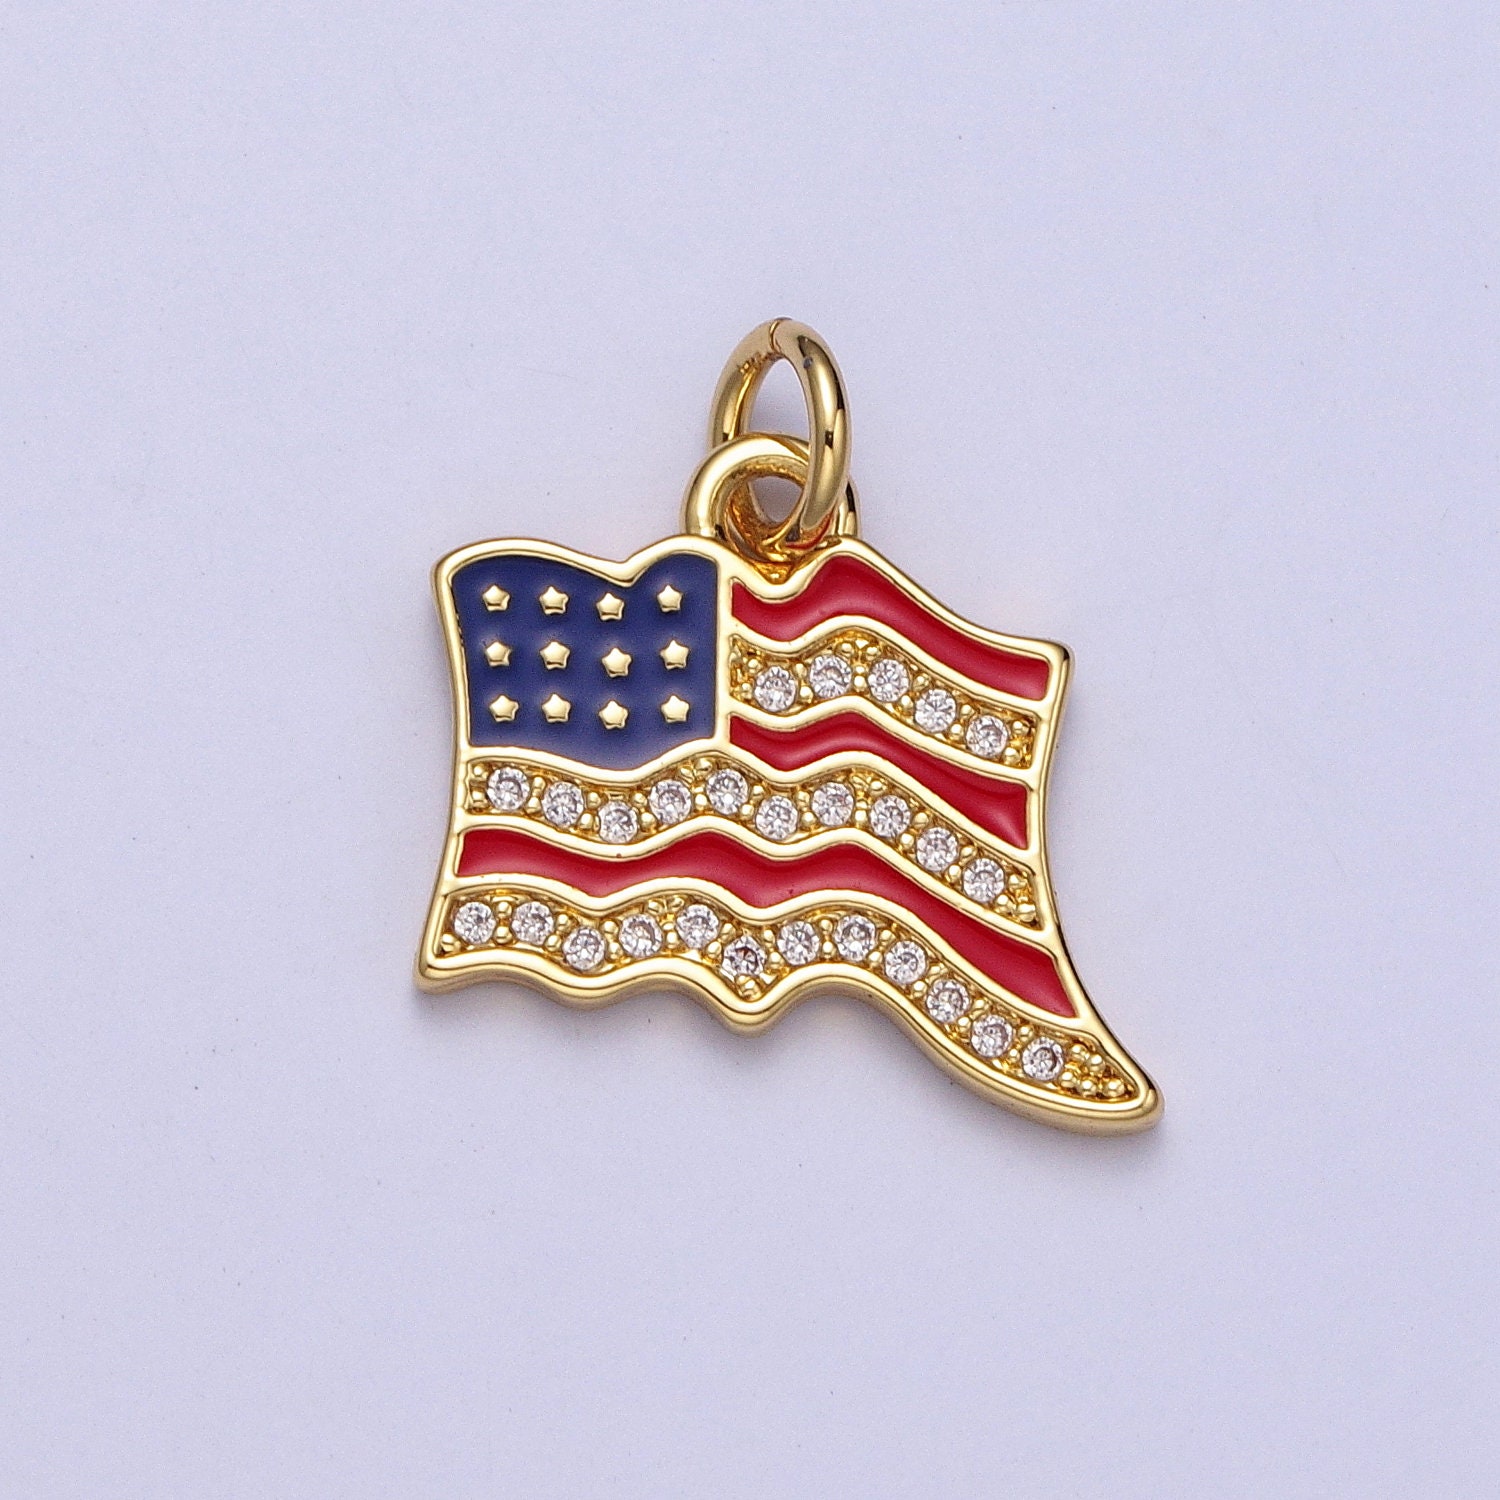 US / Israel Flag Embroidered Patch Gold Border 